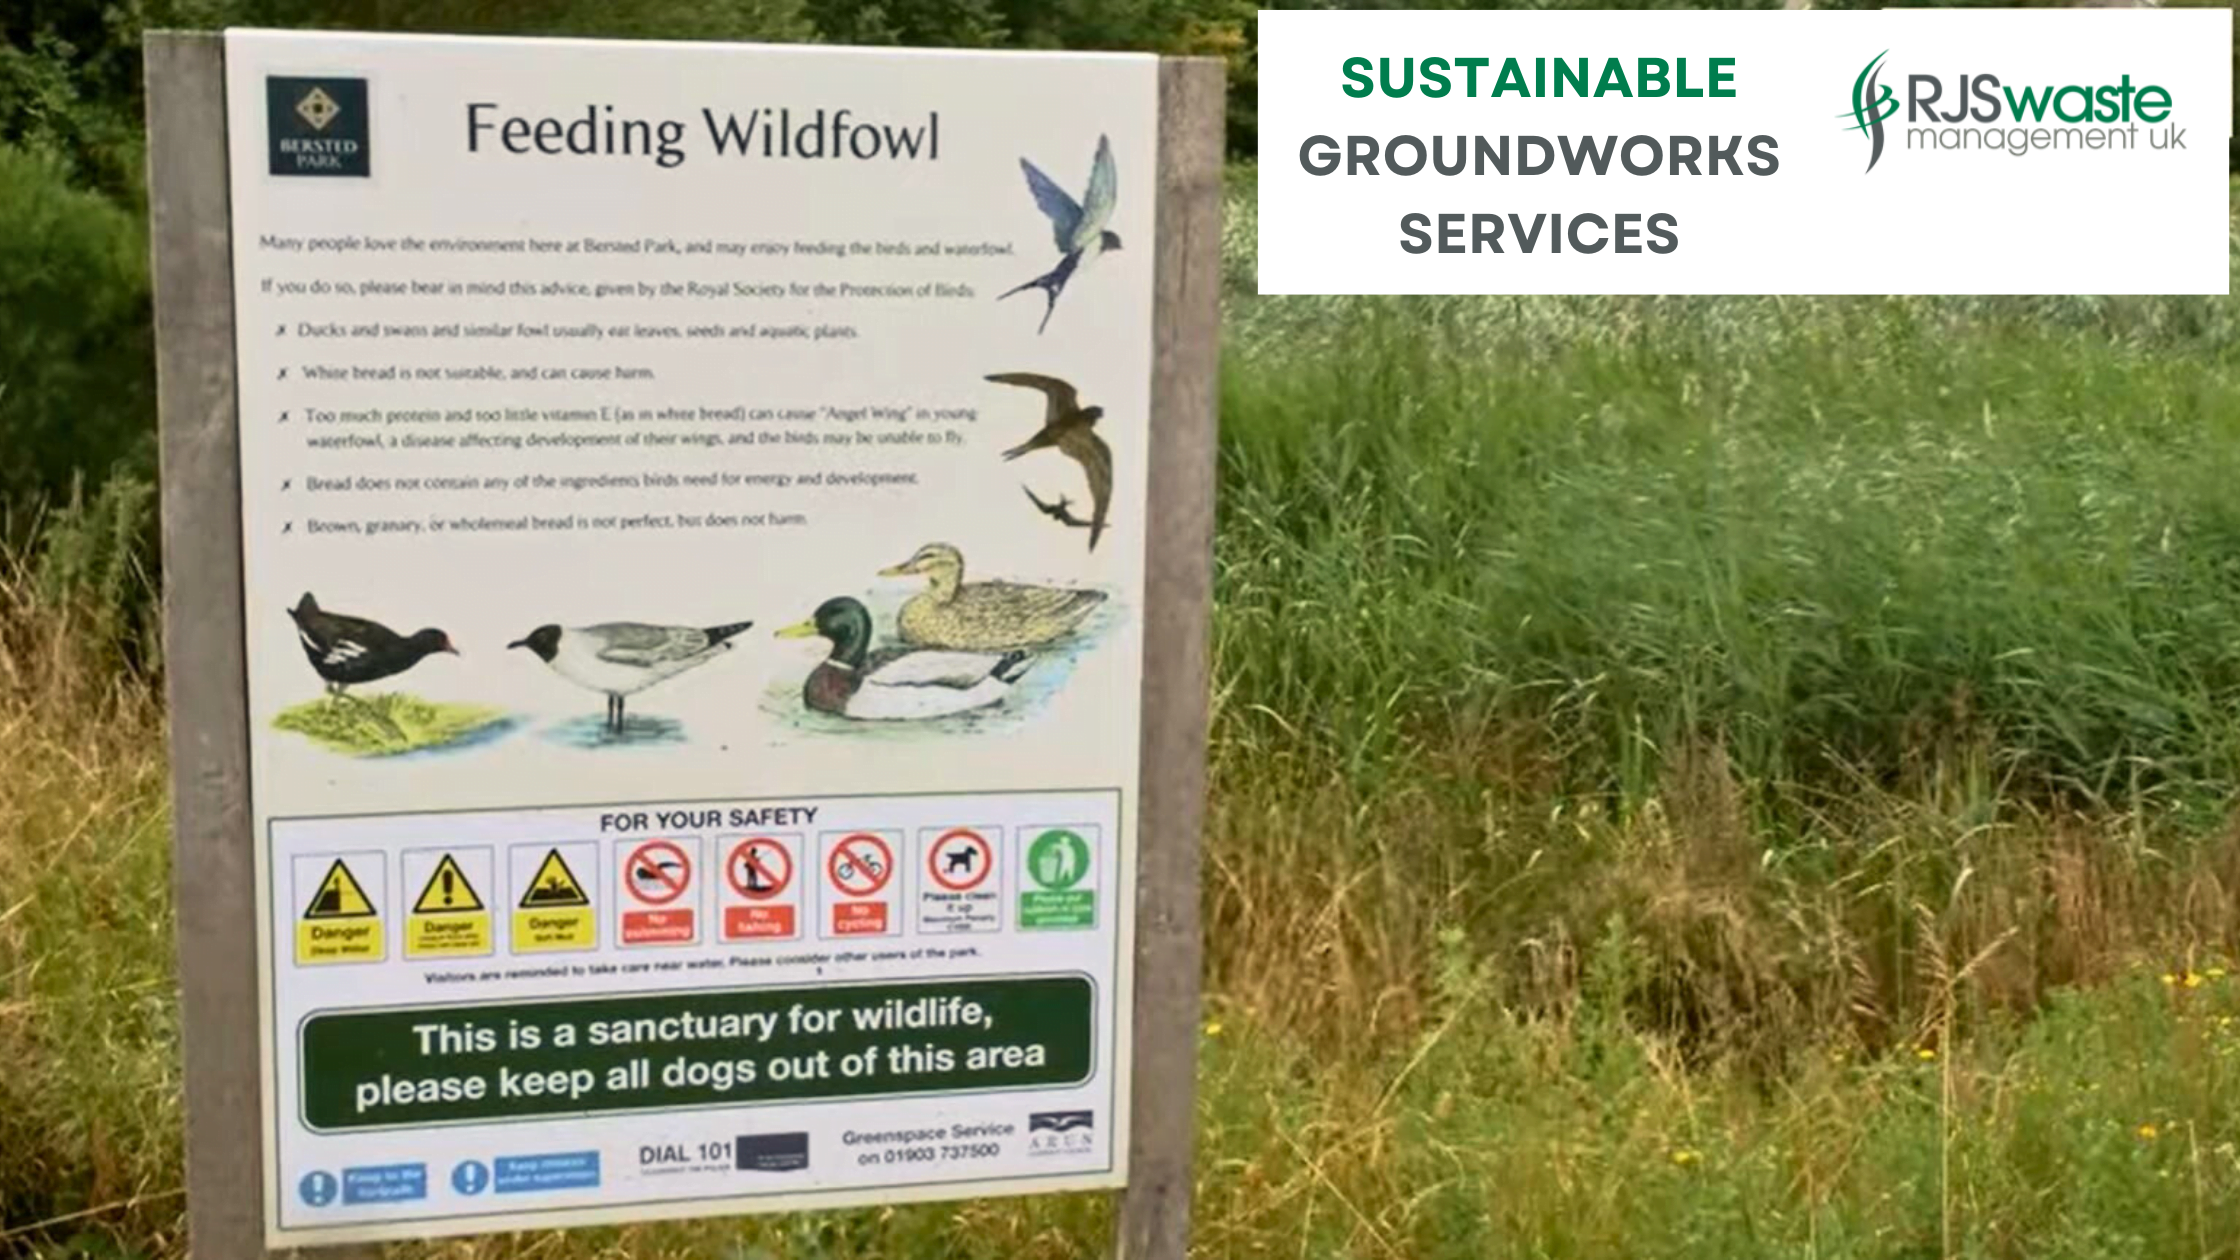 Sign showing wildlife present at site where RJS Waste Management carried our sustainable groundworks services